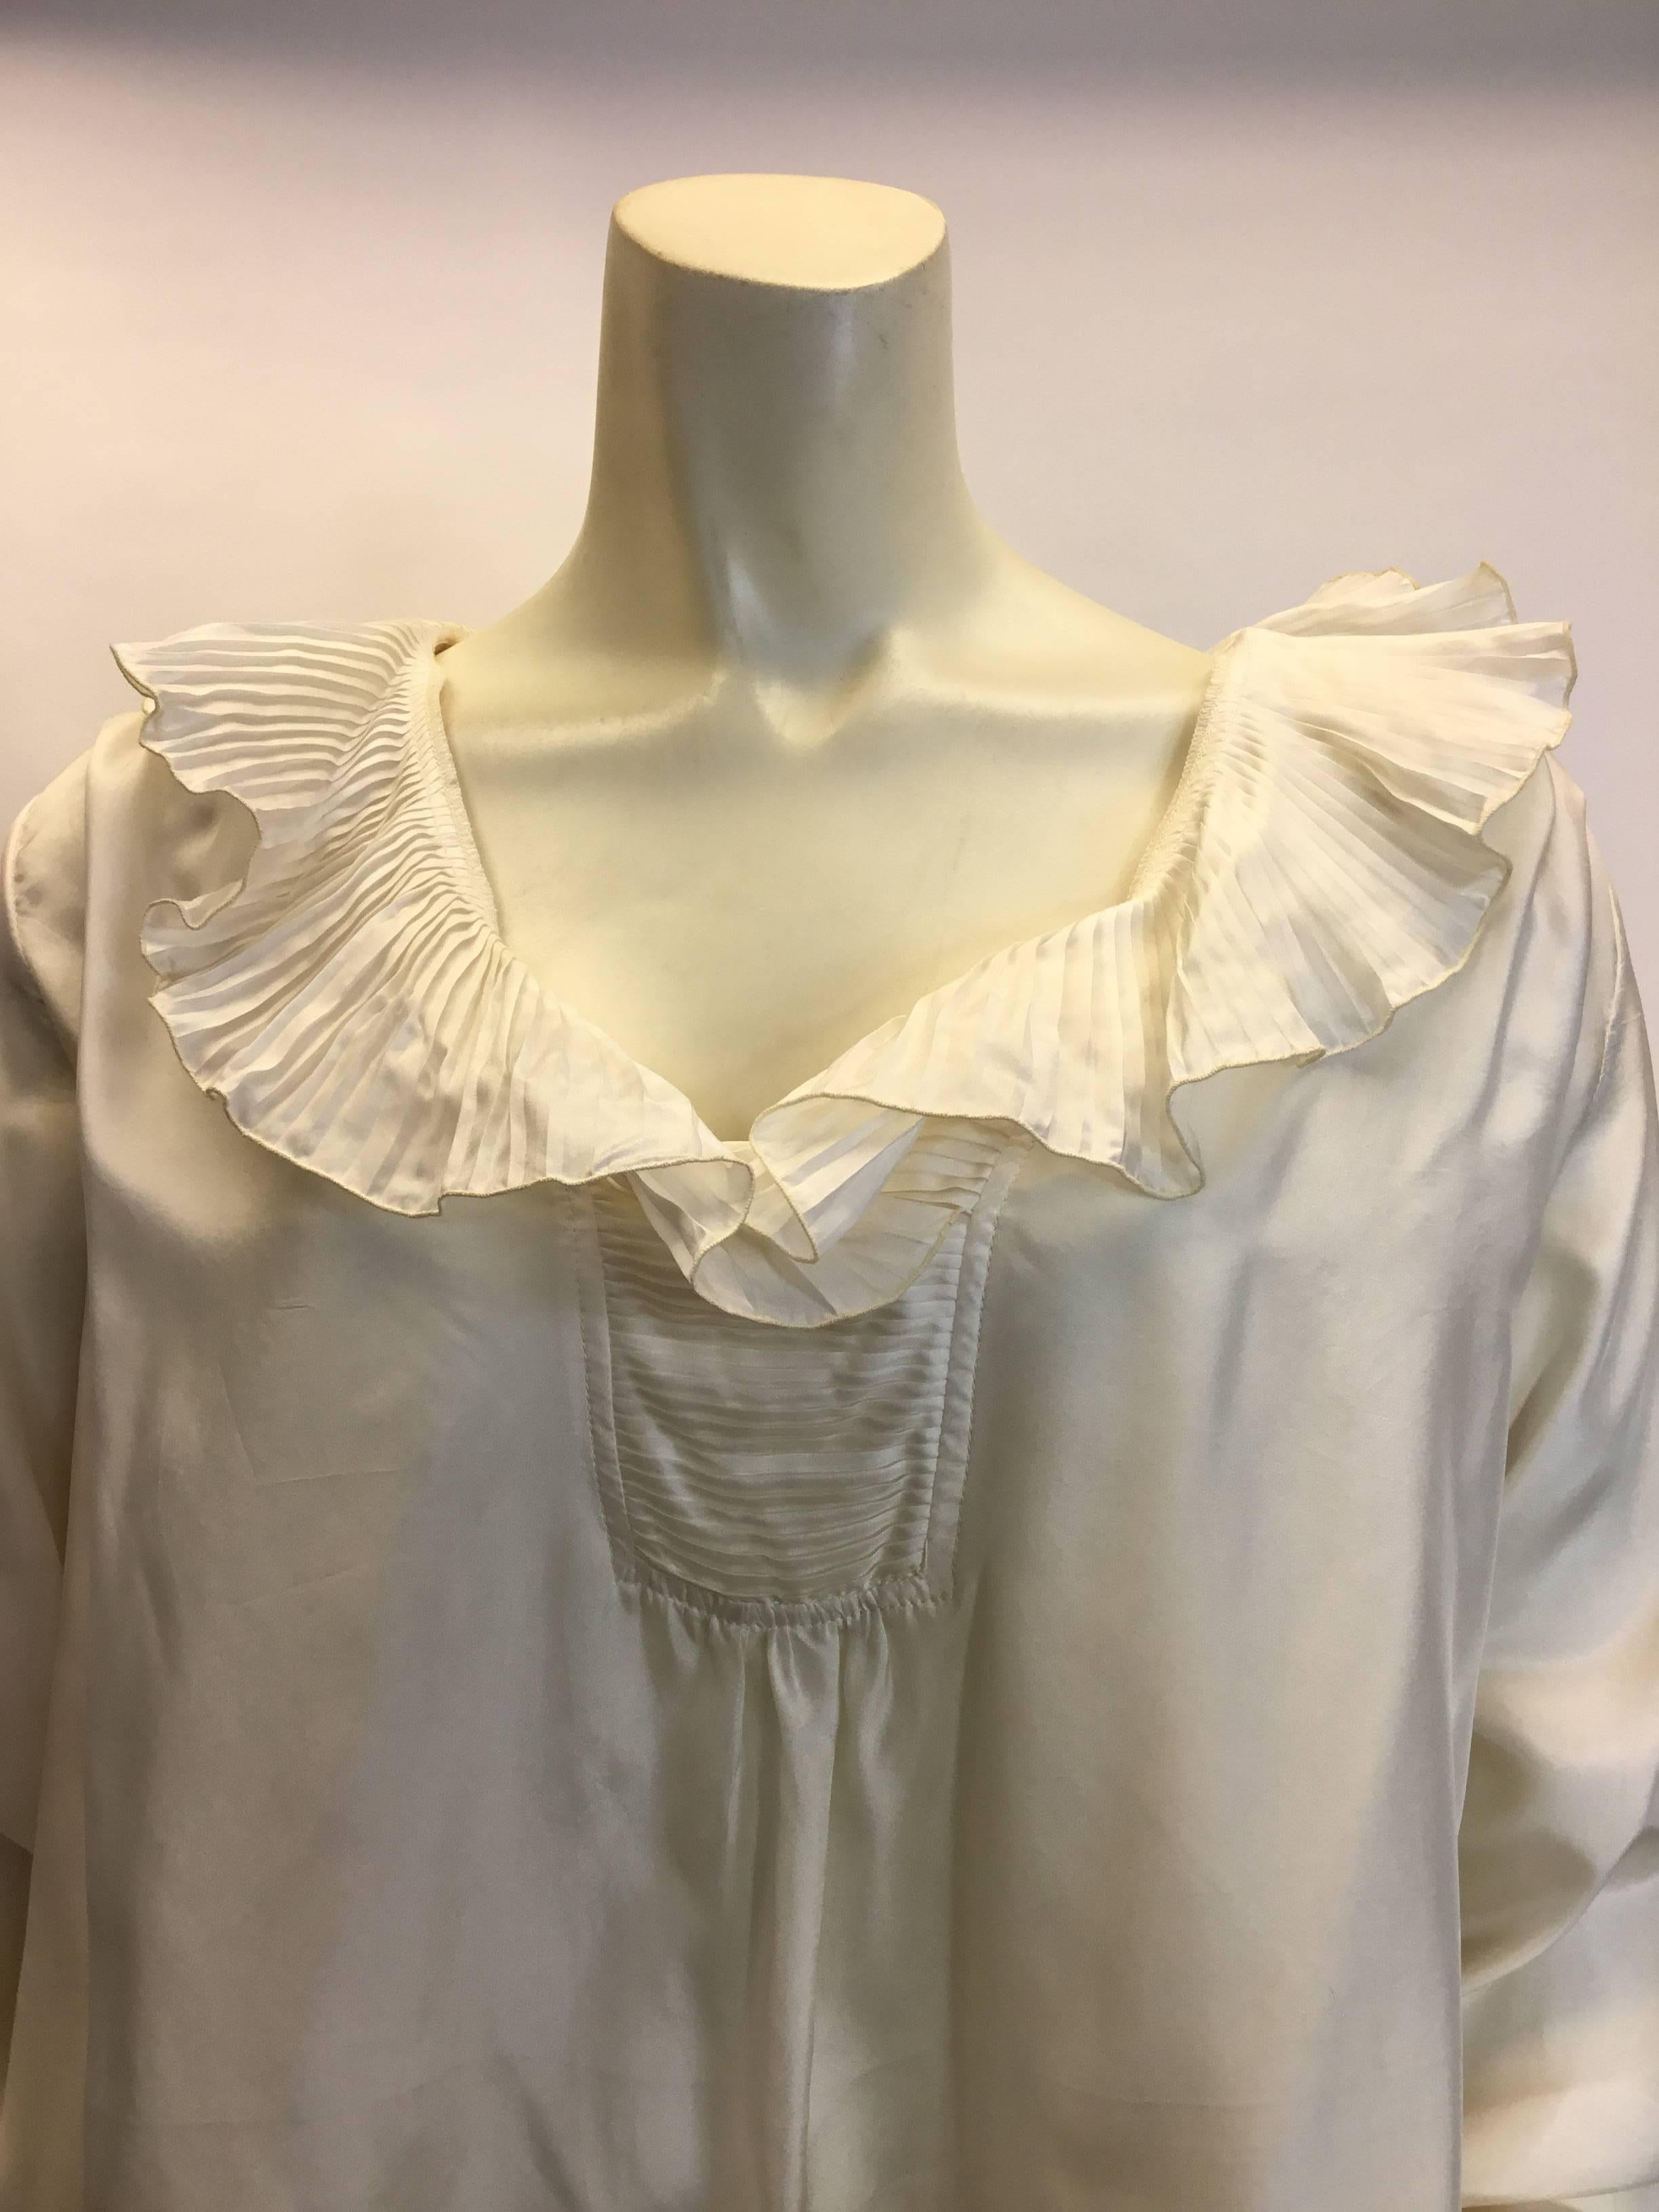 Zanda Rhodes Silk Cream Vintage Blouse
Size 10 petite
Made in England
100% silk
Slight staining under the arm and a stain on the front, see photos
